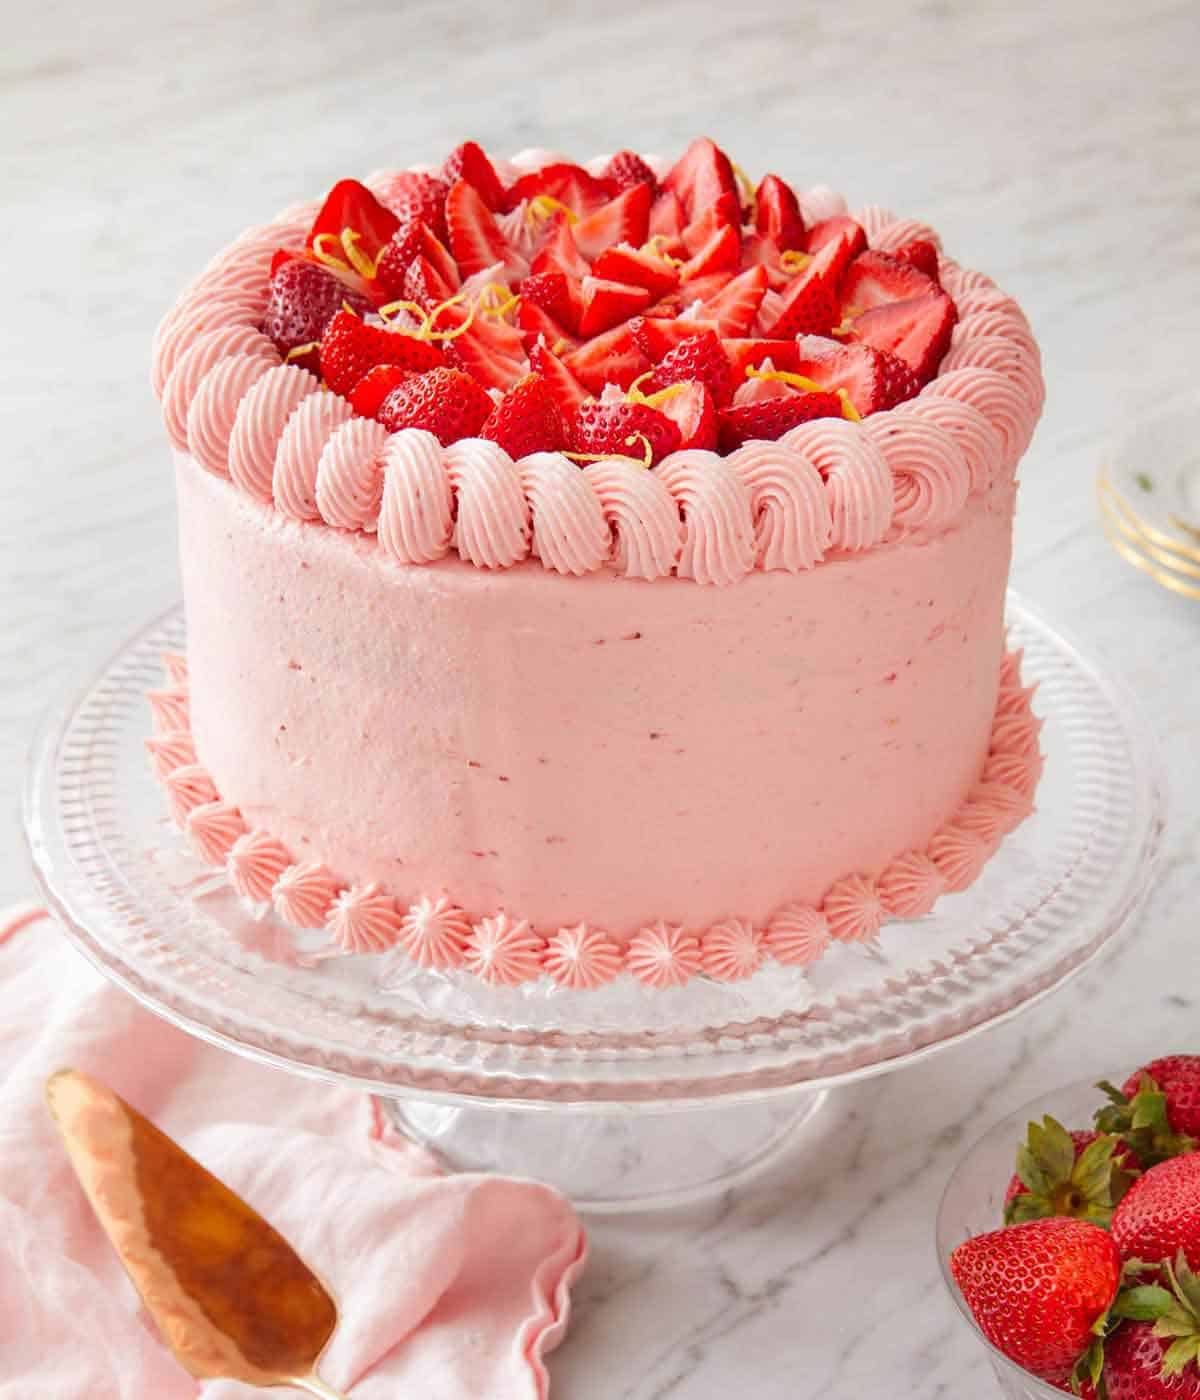 A strawberry lemonade cake on a clear cake stand with some fresh strawberries on top and in a bowl in front.